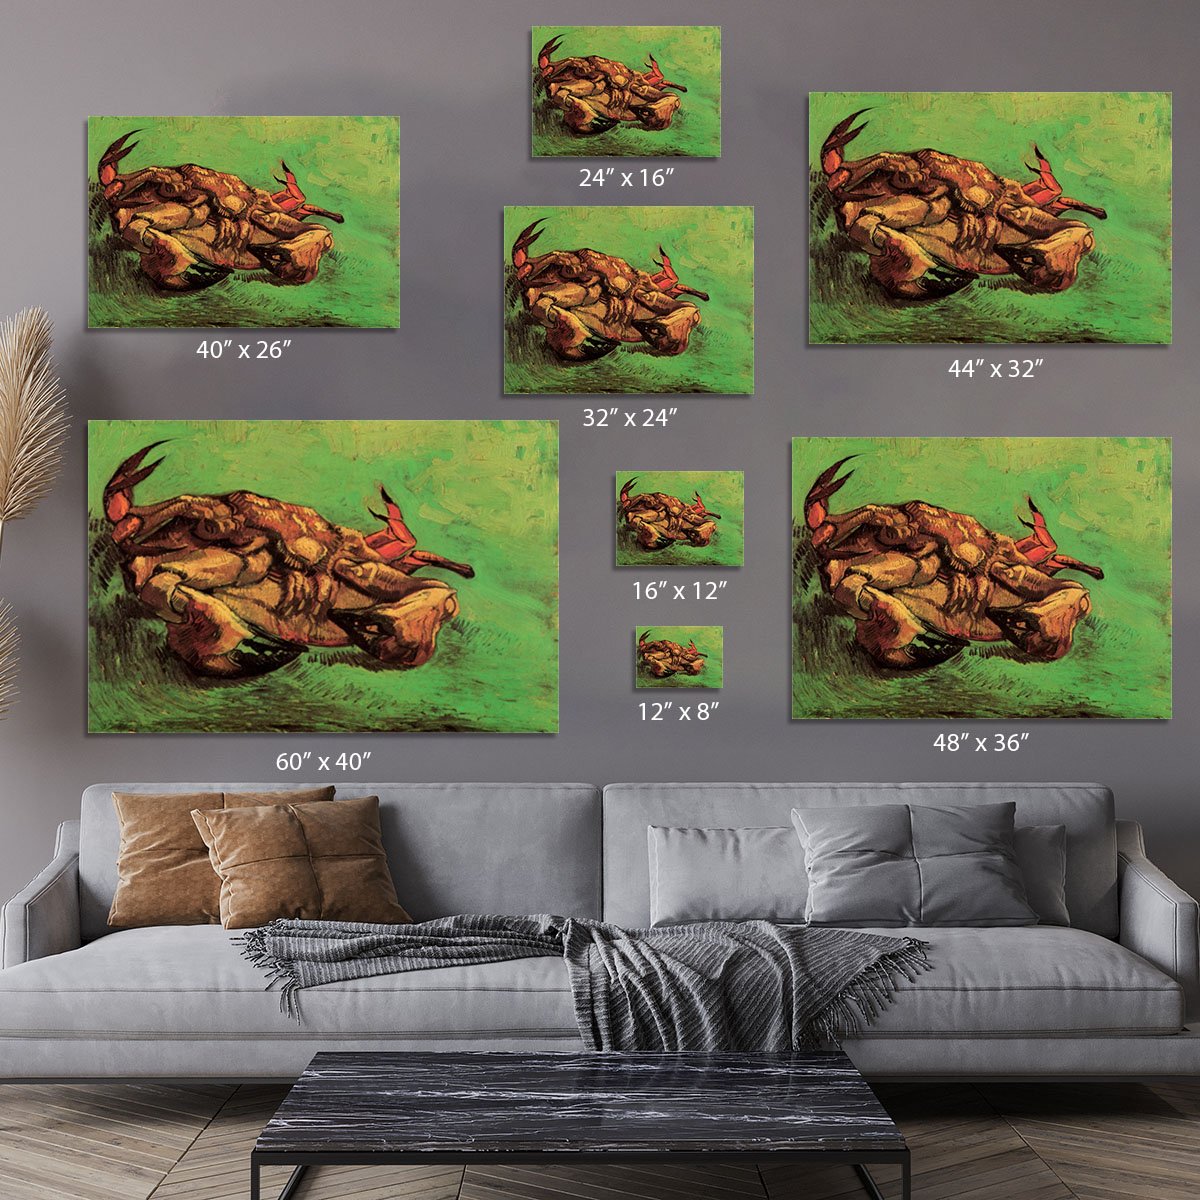 Crab on Its Back by Van Gogh Canvas Print or Poster